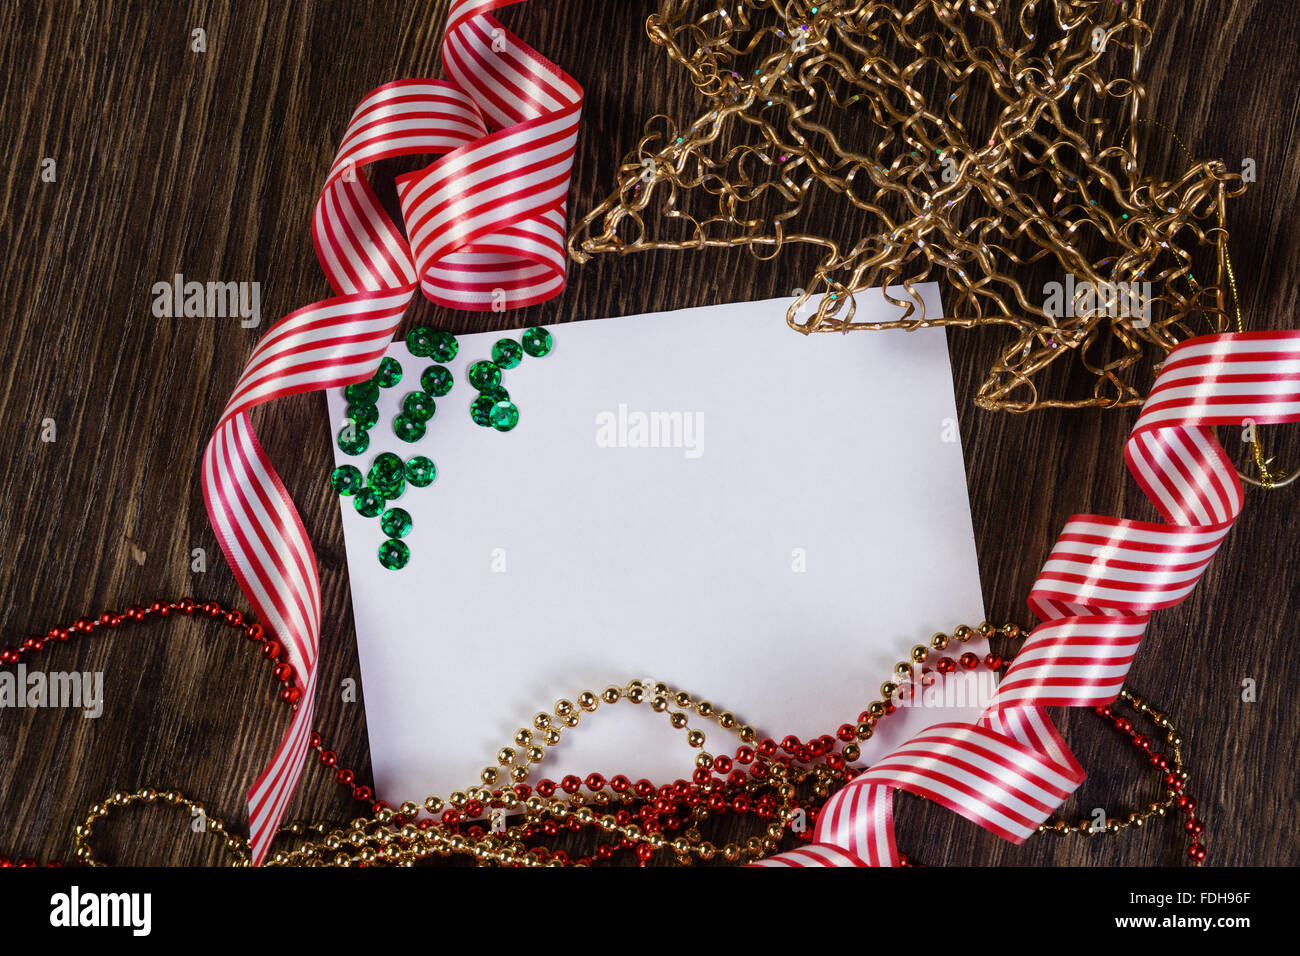 White blank card and decoration elements. Place for text Stock Photo